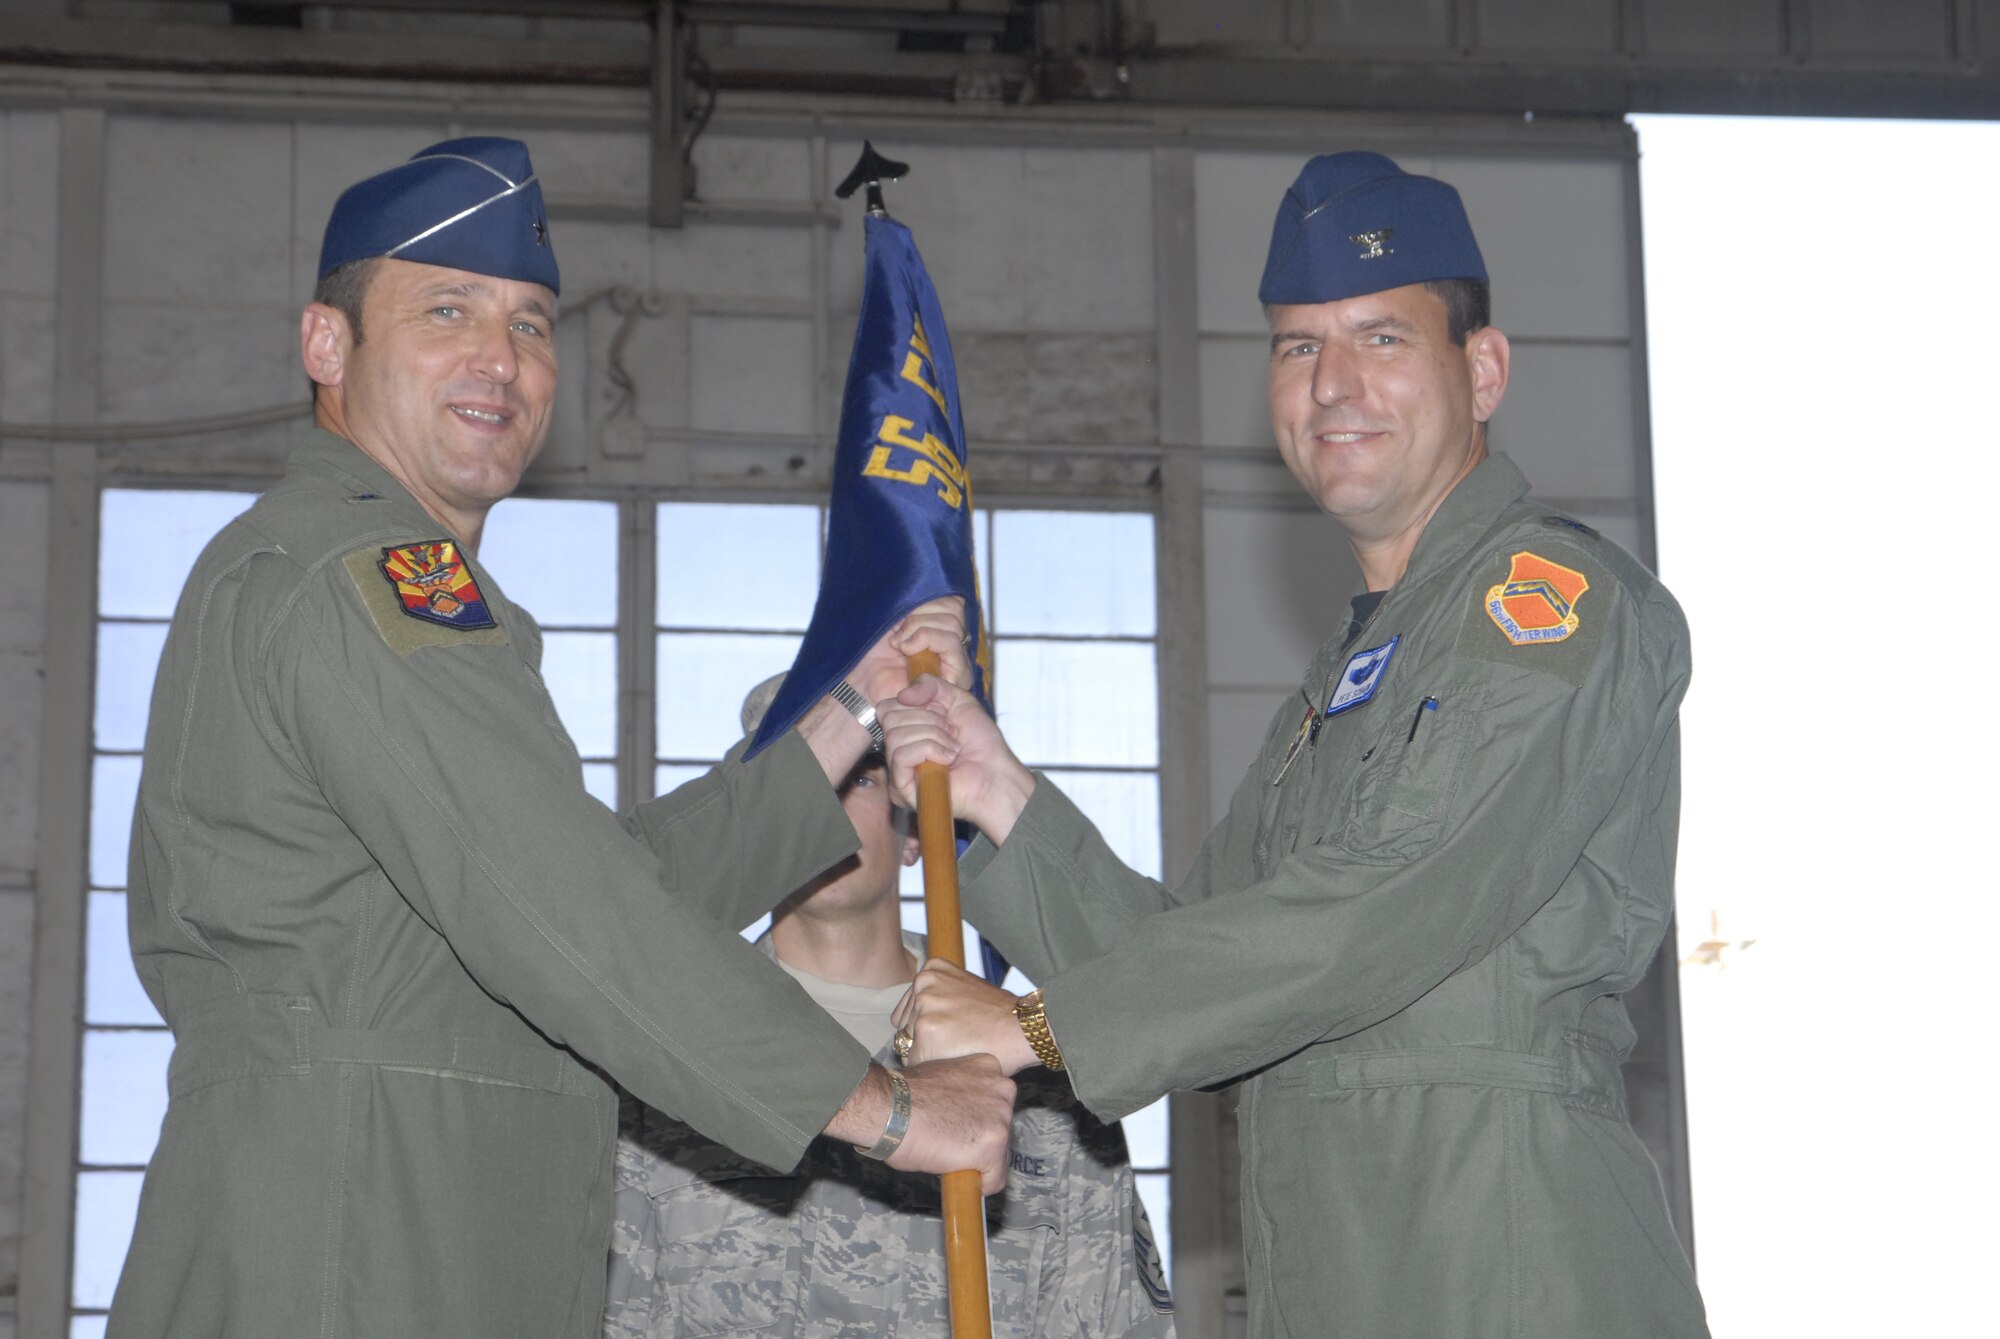 Brig. Gen. Jones, 56th FW commander, officiated the change of command ceremony for the 56th Operations Group June 30. Col. Robert Givens relinquished command to Col. George Schaub. (U.S. Air Force photo by SSgt. Steven Nabor)